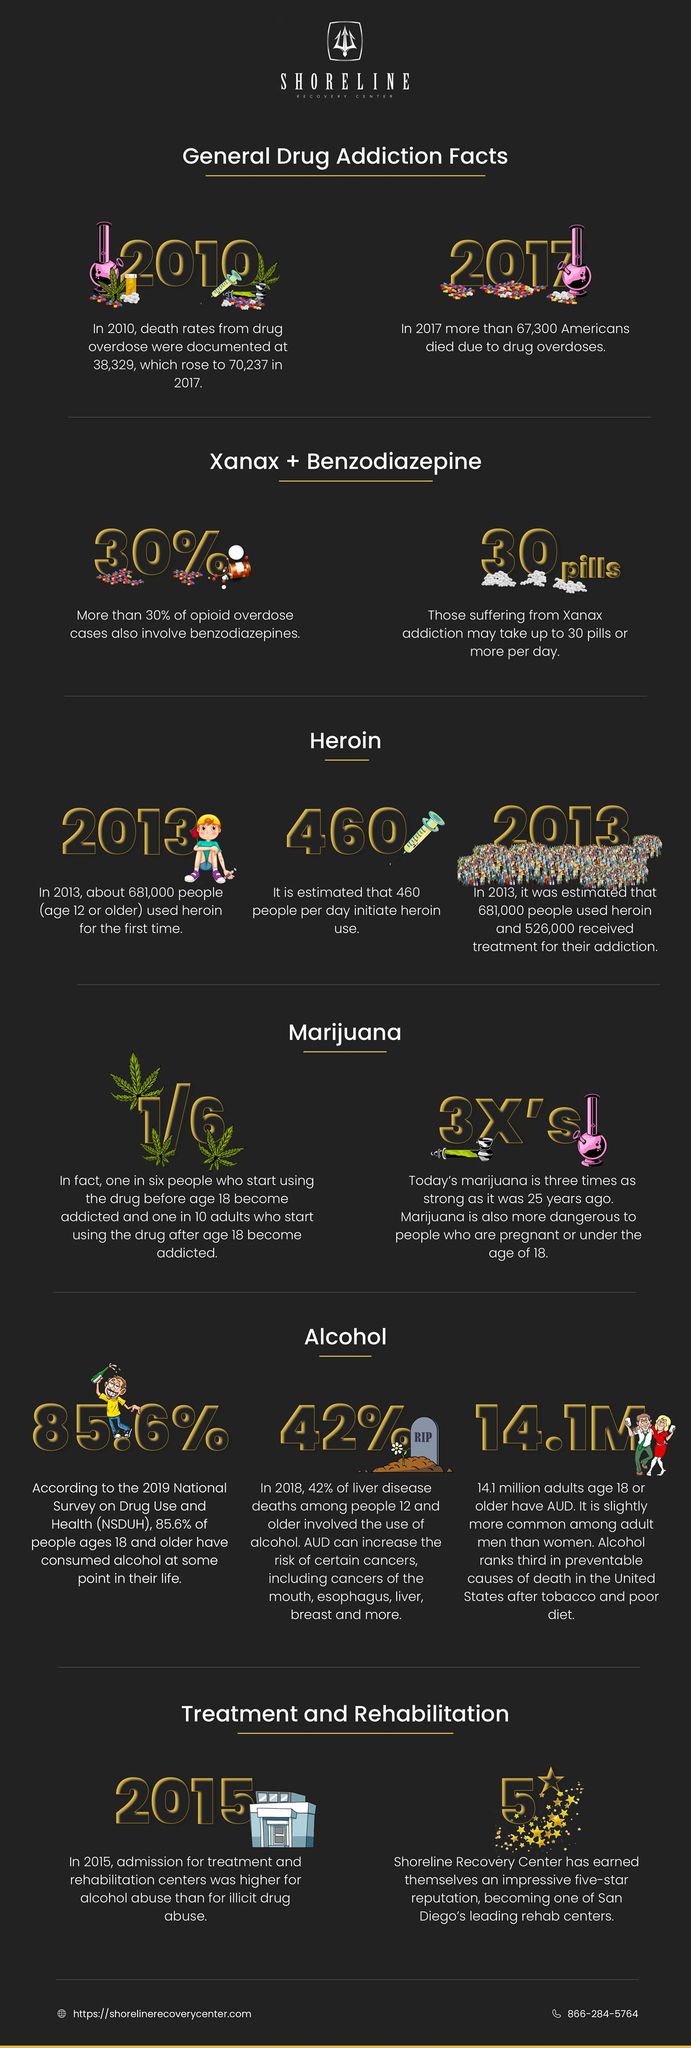 General Drug Addiction Facts Infographic